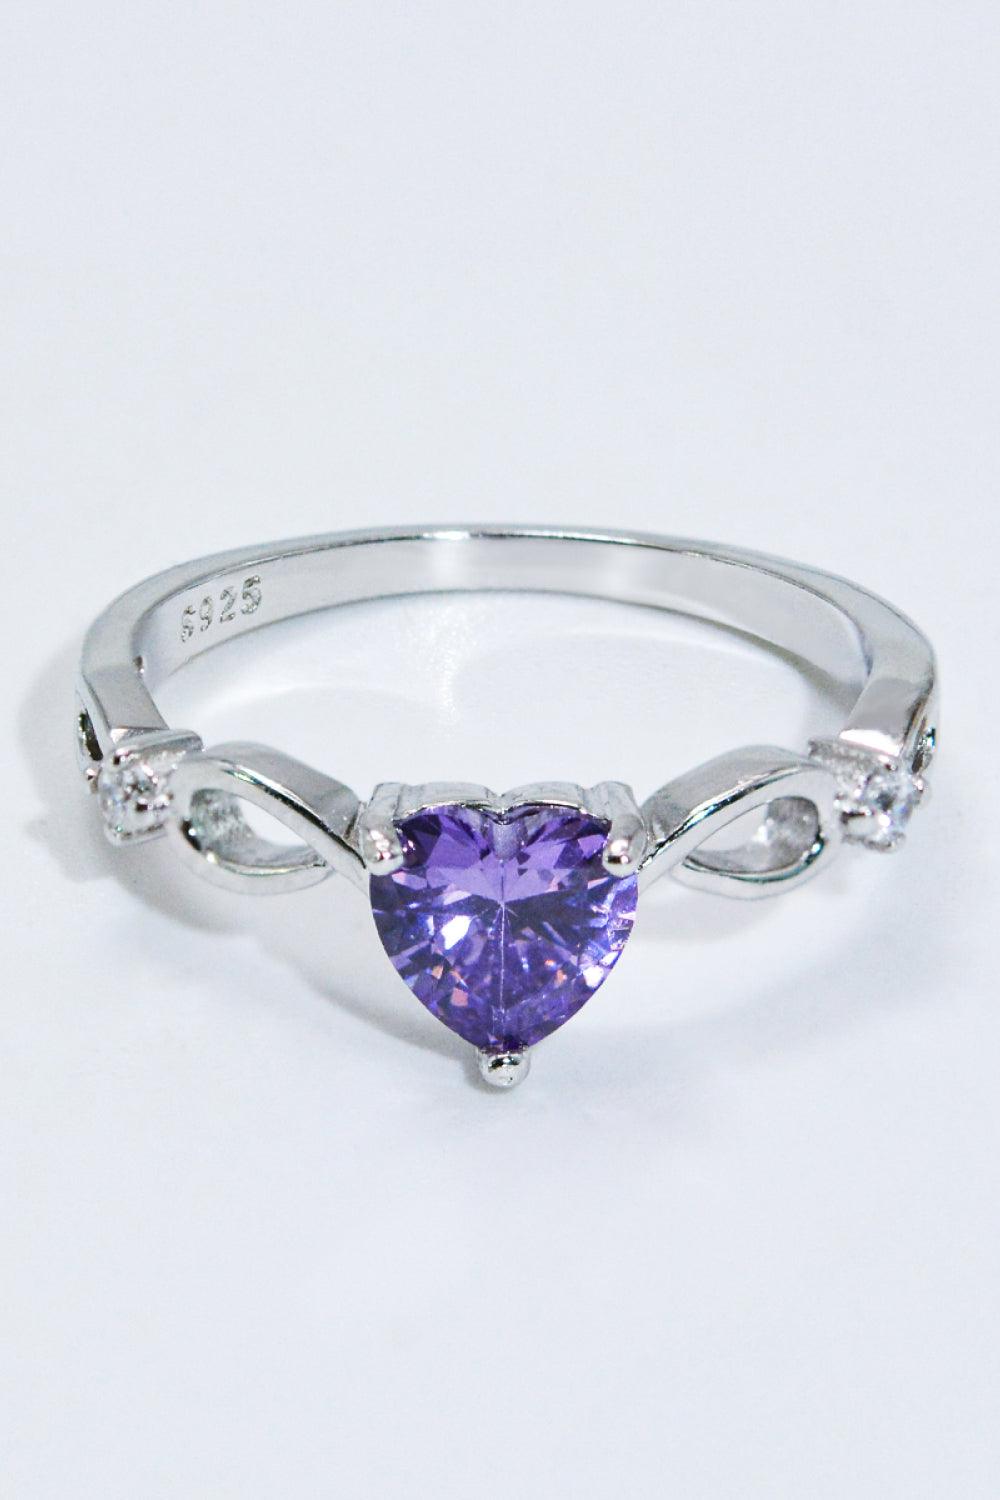 Faux Amethyst Crystal Heart 925 Sterling Silver Ring - Crazy Like a Daisy Boutique #